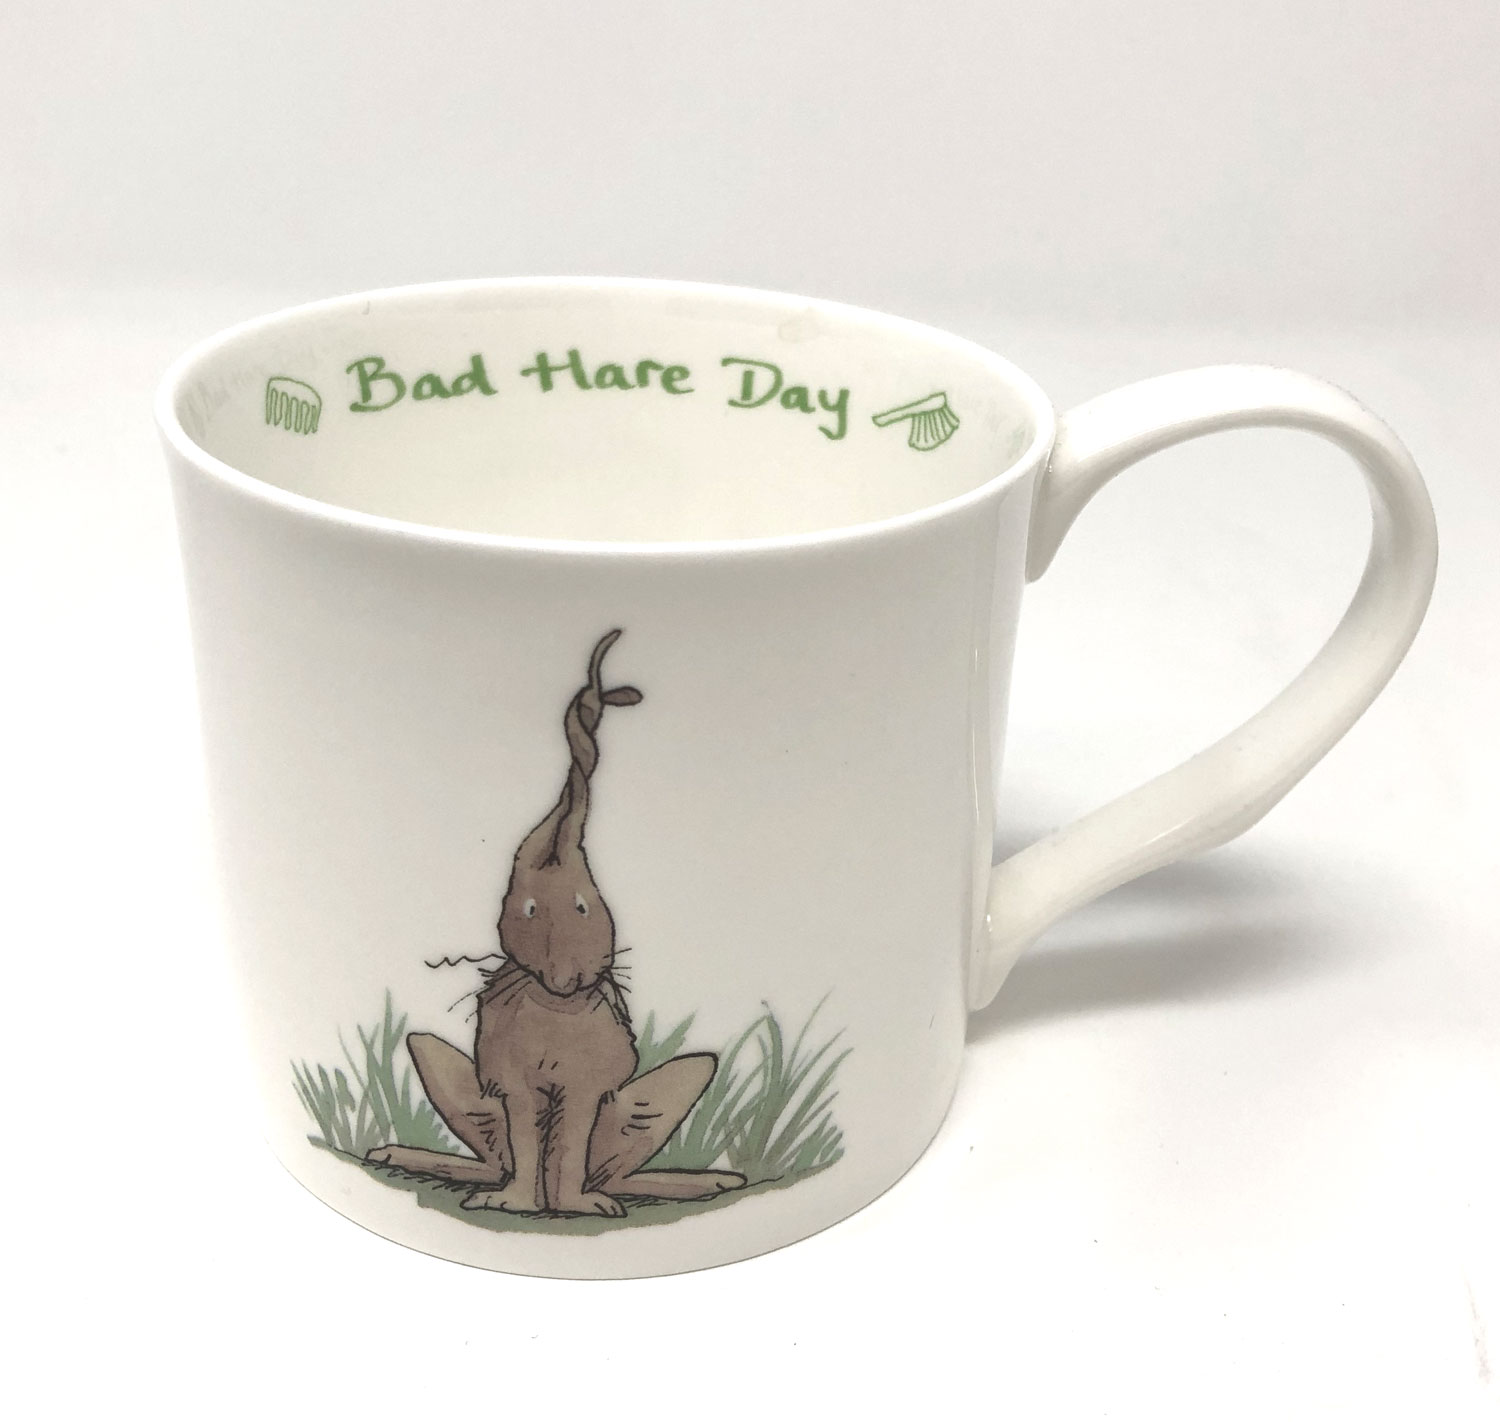 Two Bad Mice Becher groß "Bad Hare Day", 400 ml by Anita Jeram